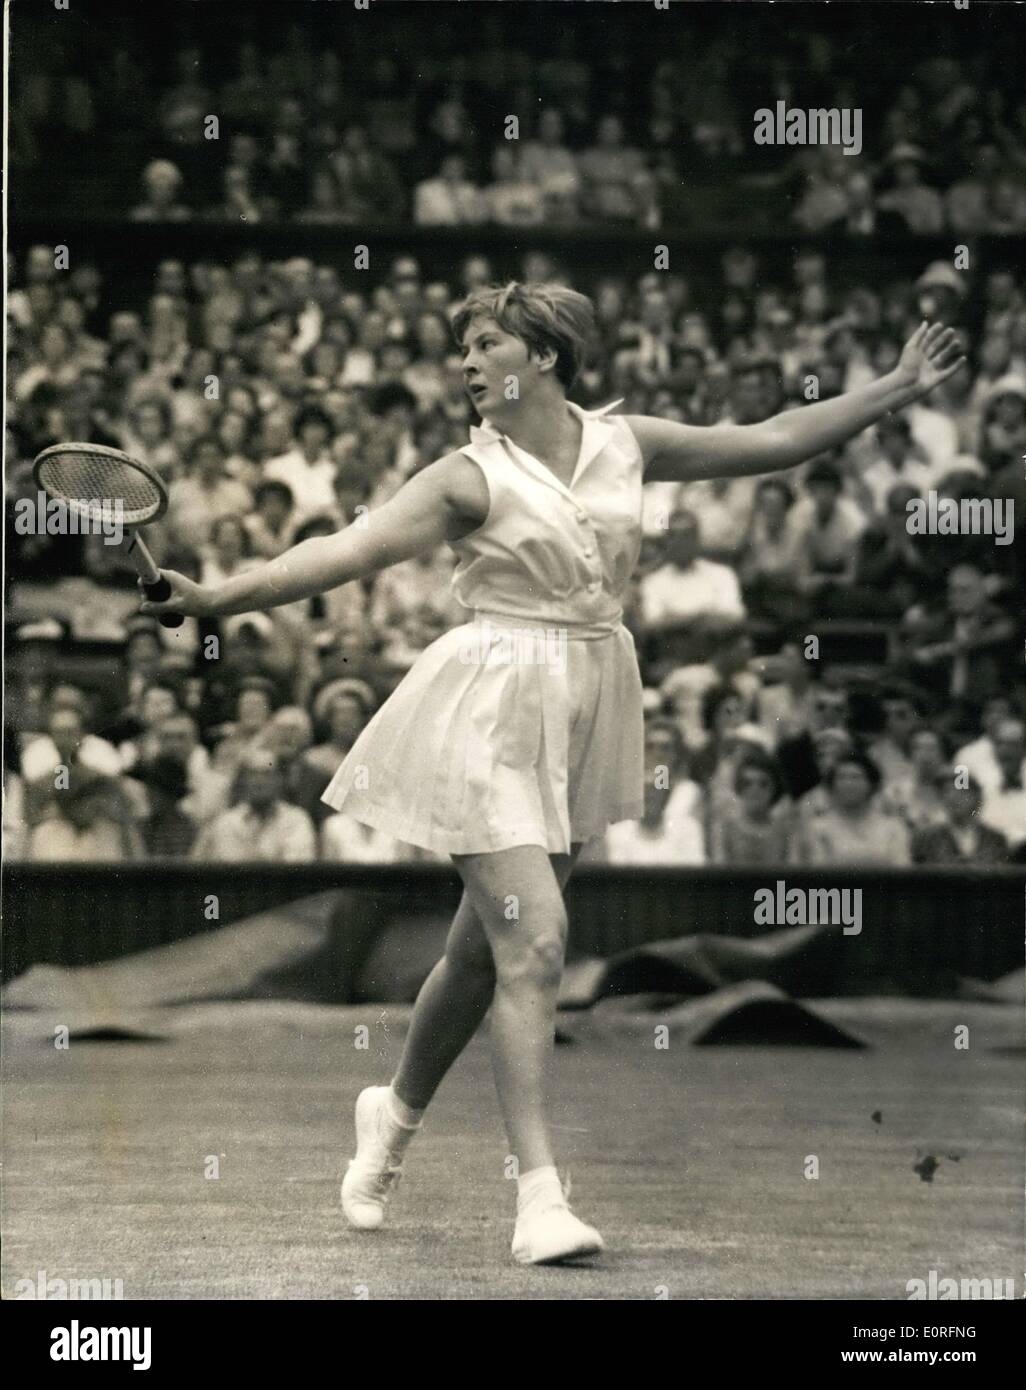 Jun. 06, 1959 - WIMBLEDON TENNIS TOUREAMENT (FOURTH DAY) CHRISTINE TRUMAN  VERSUS PAT WARD PHOTO SHOWS:- Christine Truman (GB) in play against Pat  Ward during their match on the centre court today